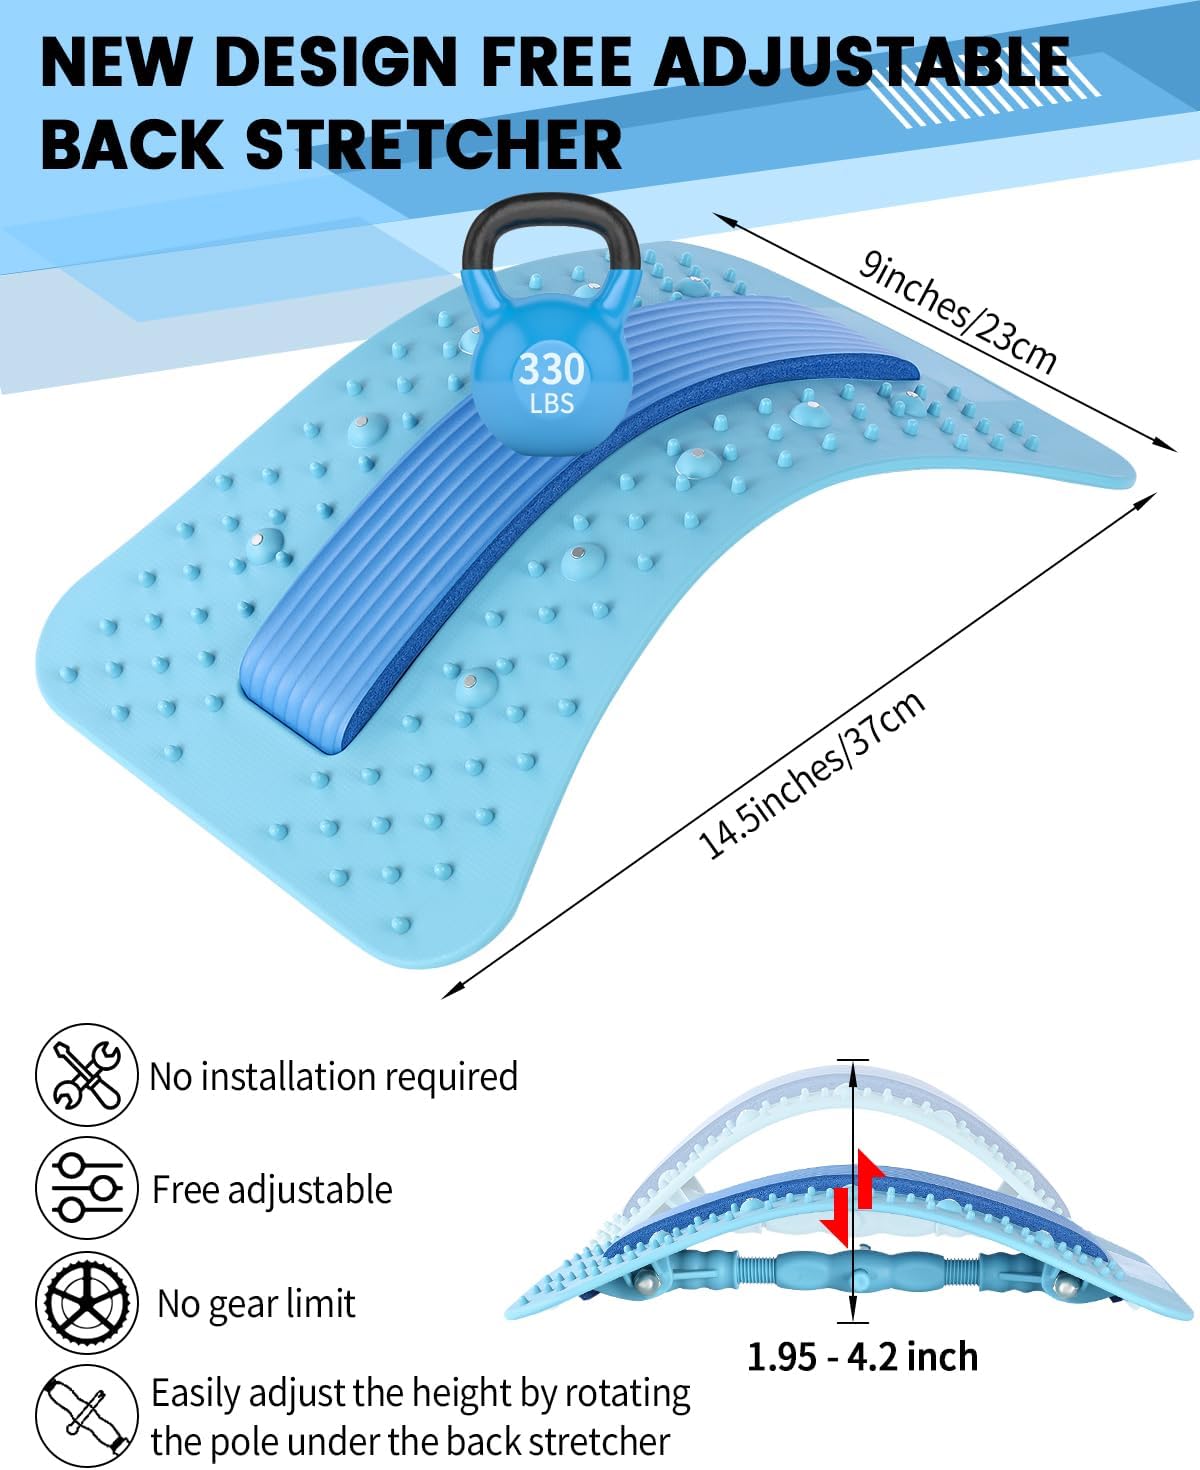 Back Stretcher for Pain Relief